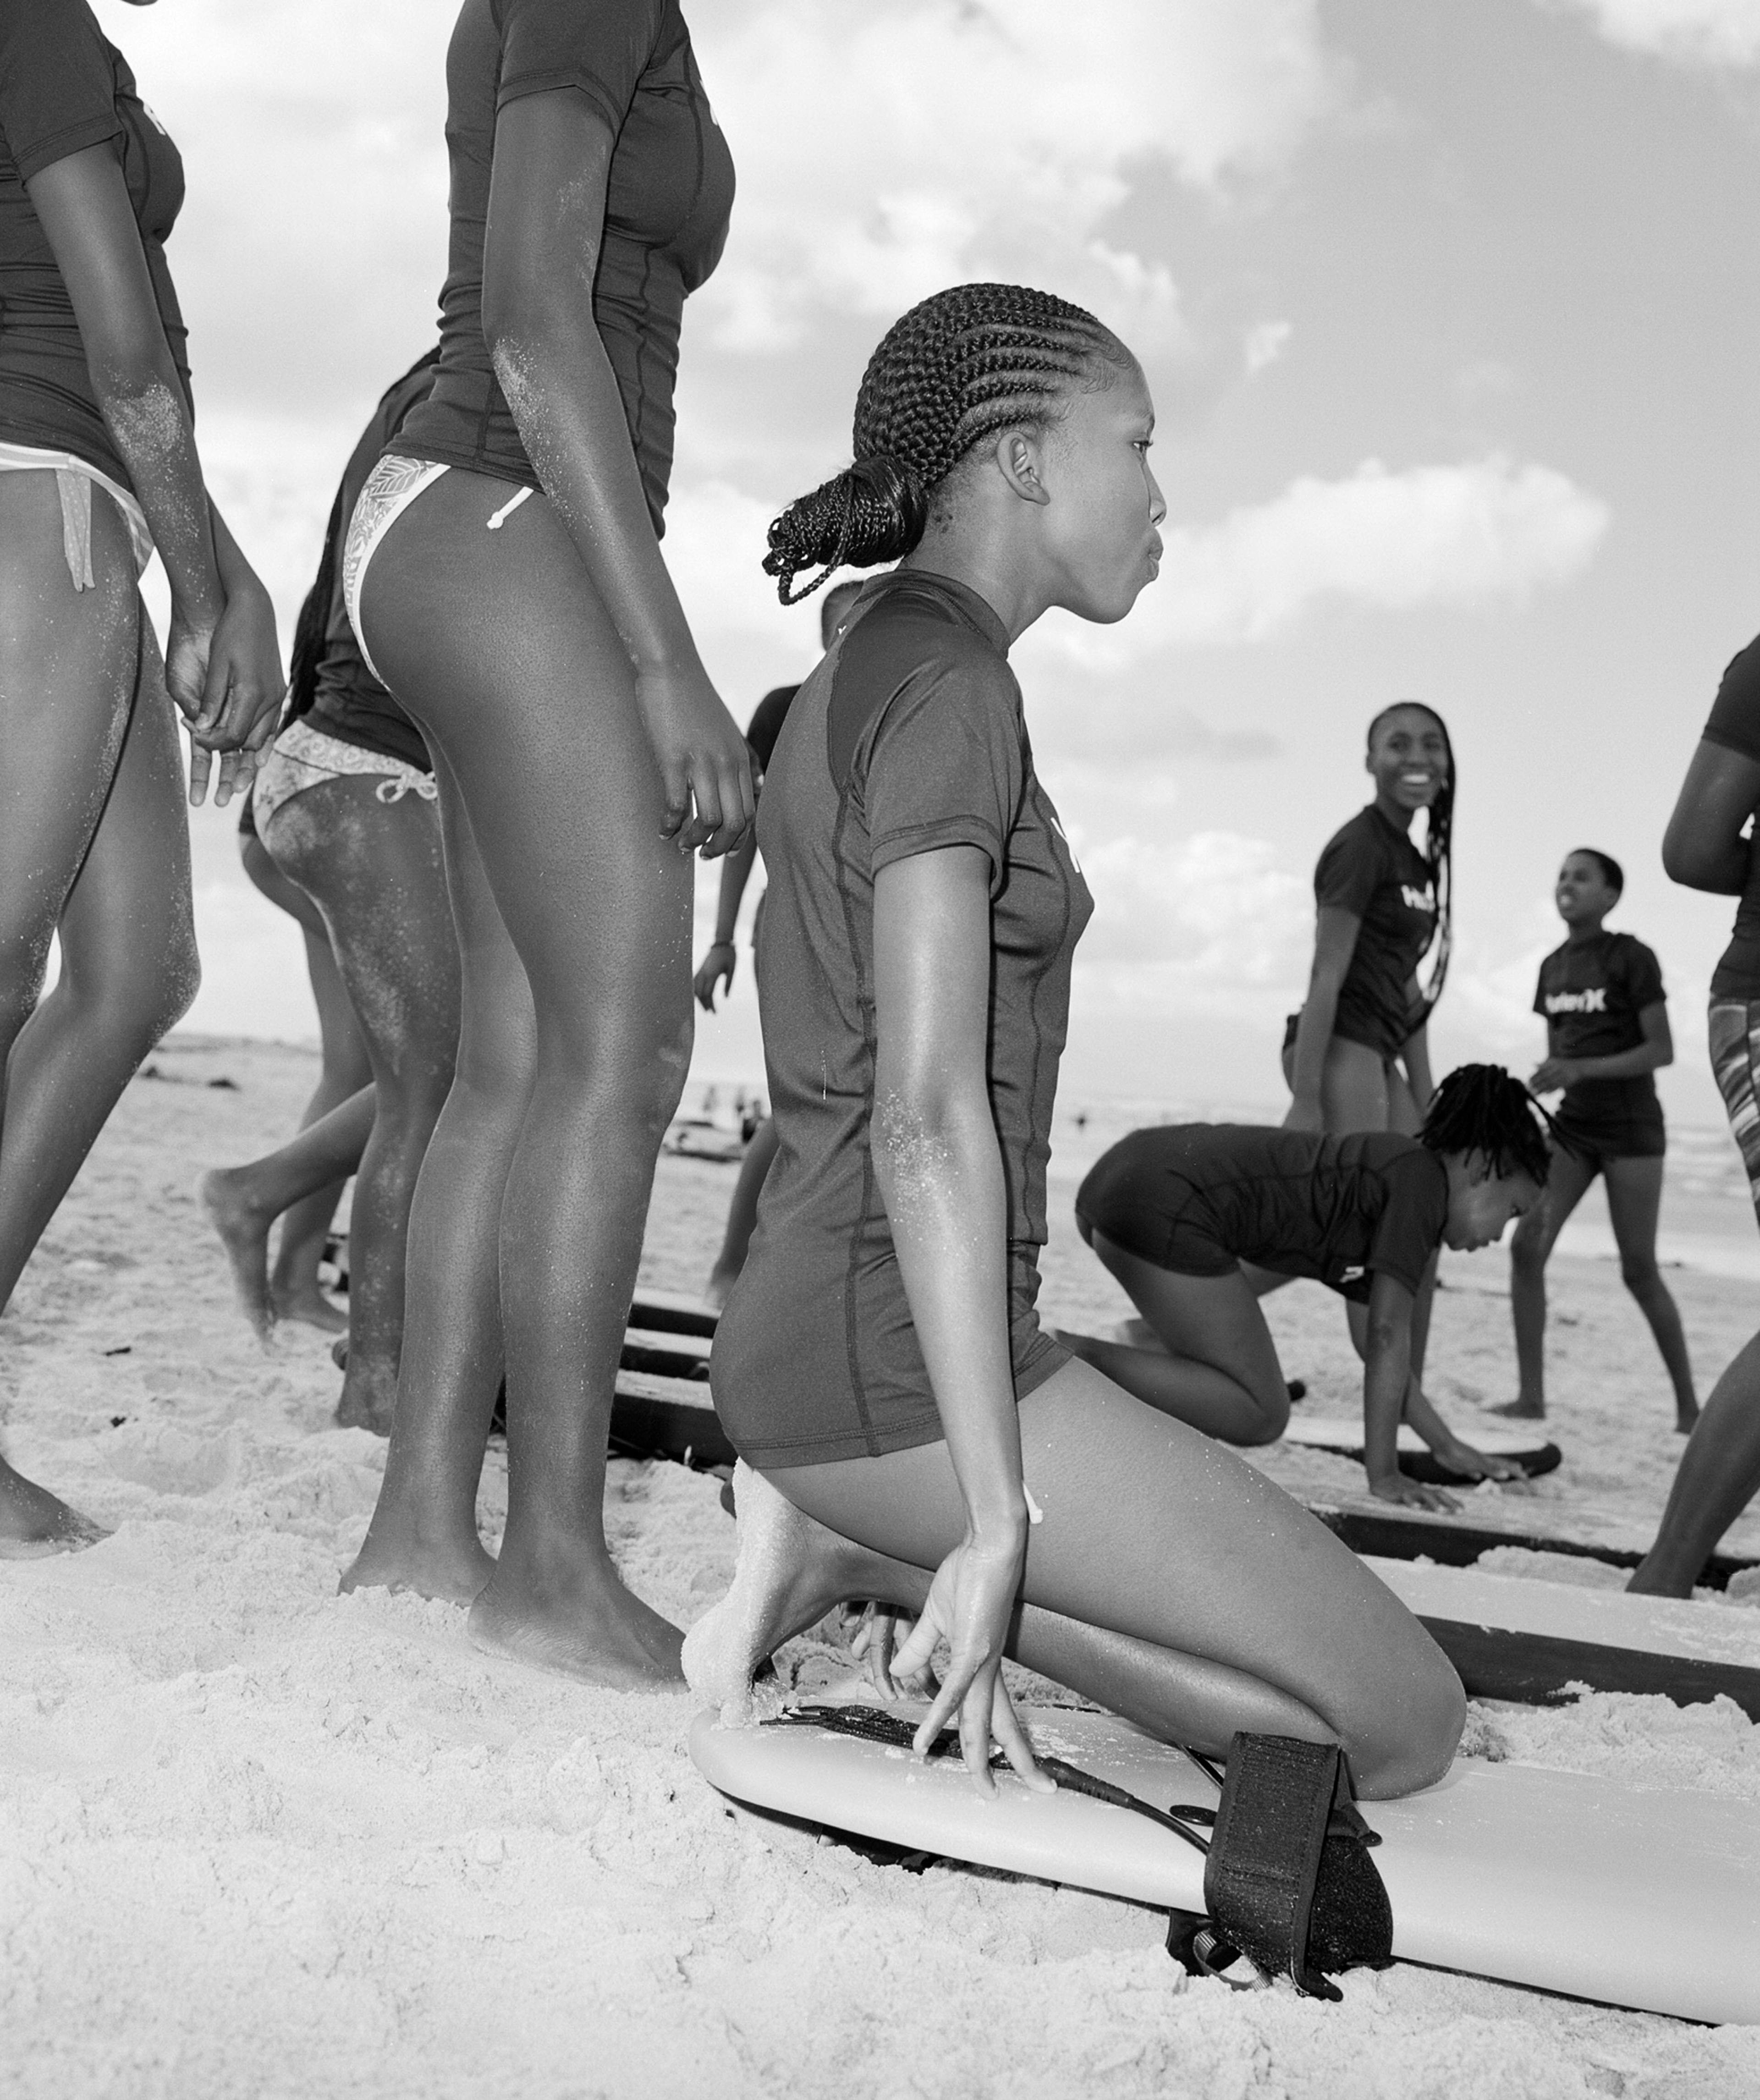 Black Girls Surf Is Making Space on the Waves